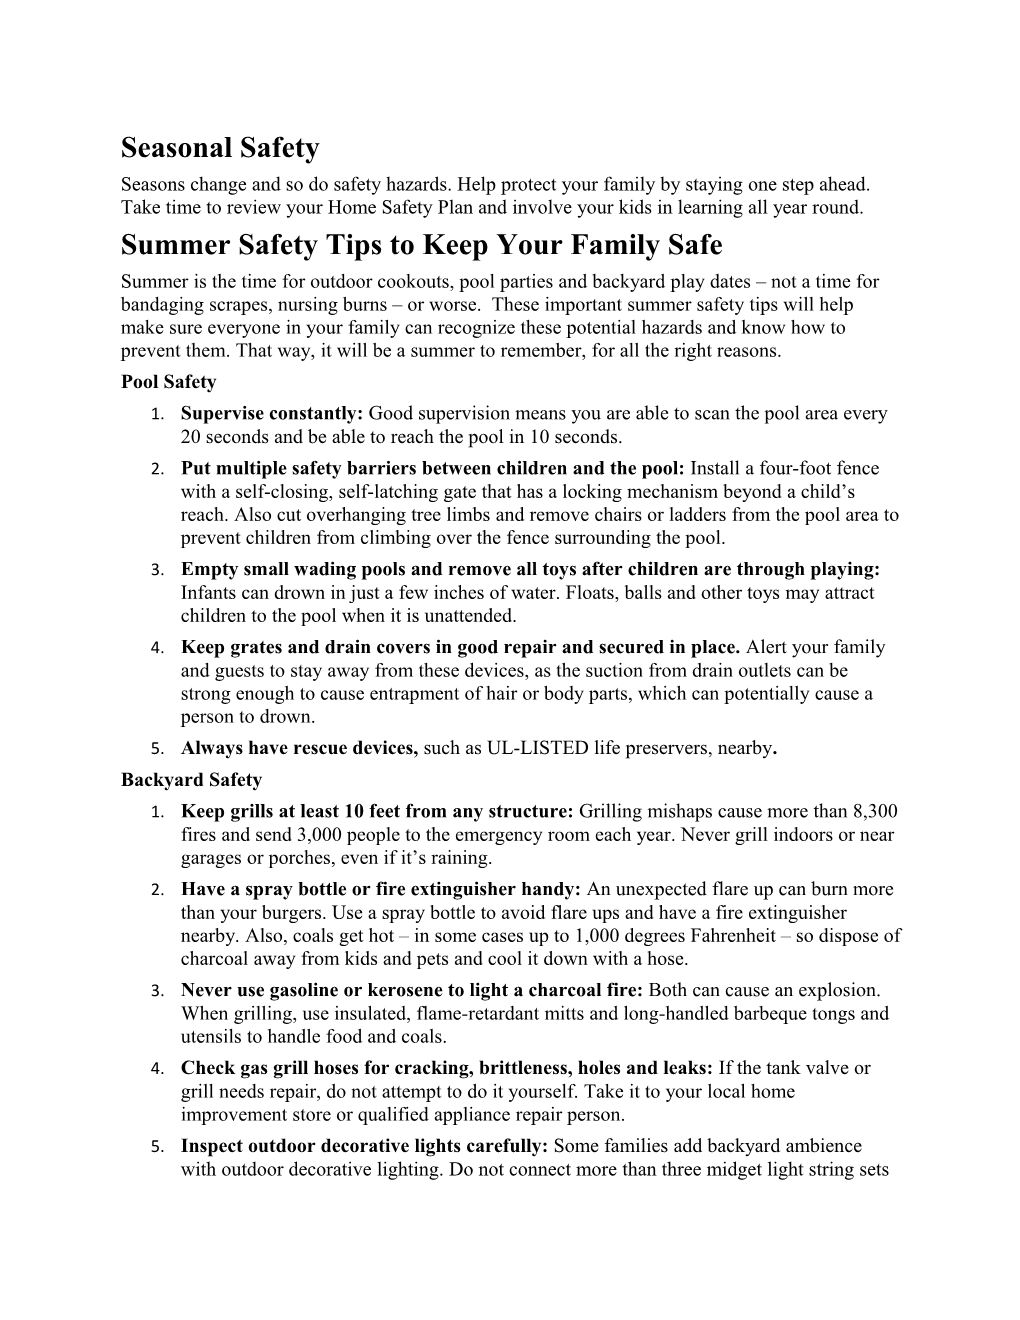 Summer Safety Tips to Keep Your Family Safe